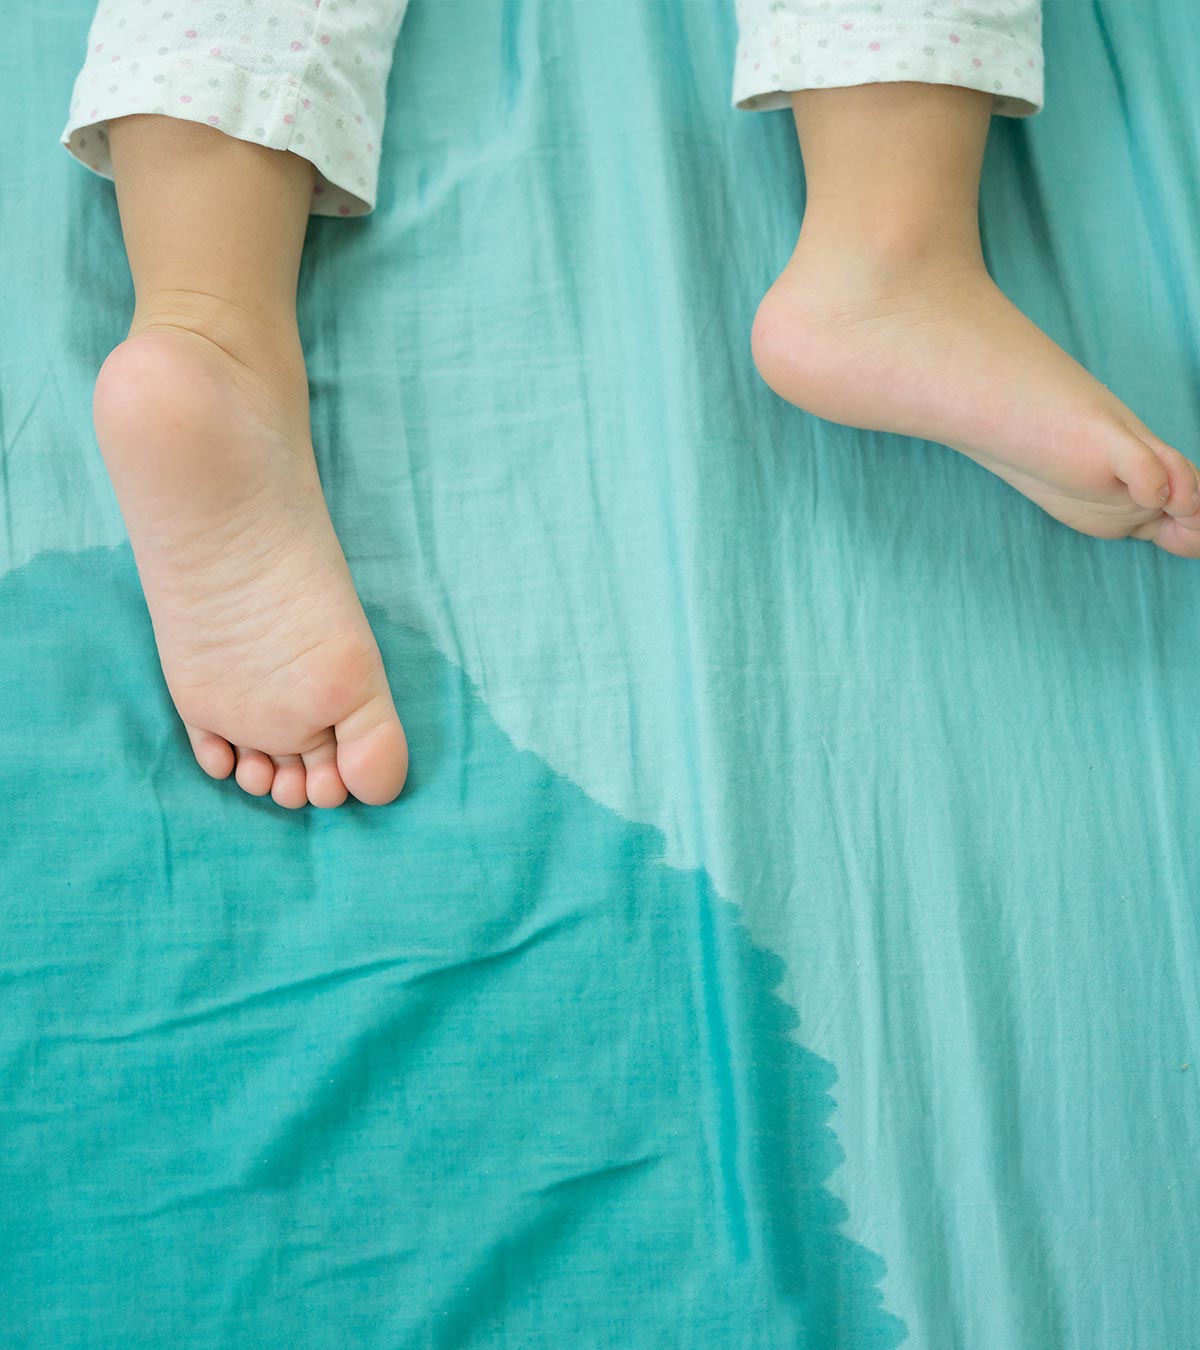 Bedwetting In Children: Causes, Treatment And Home Remedies